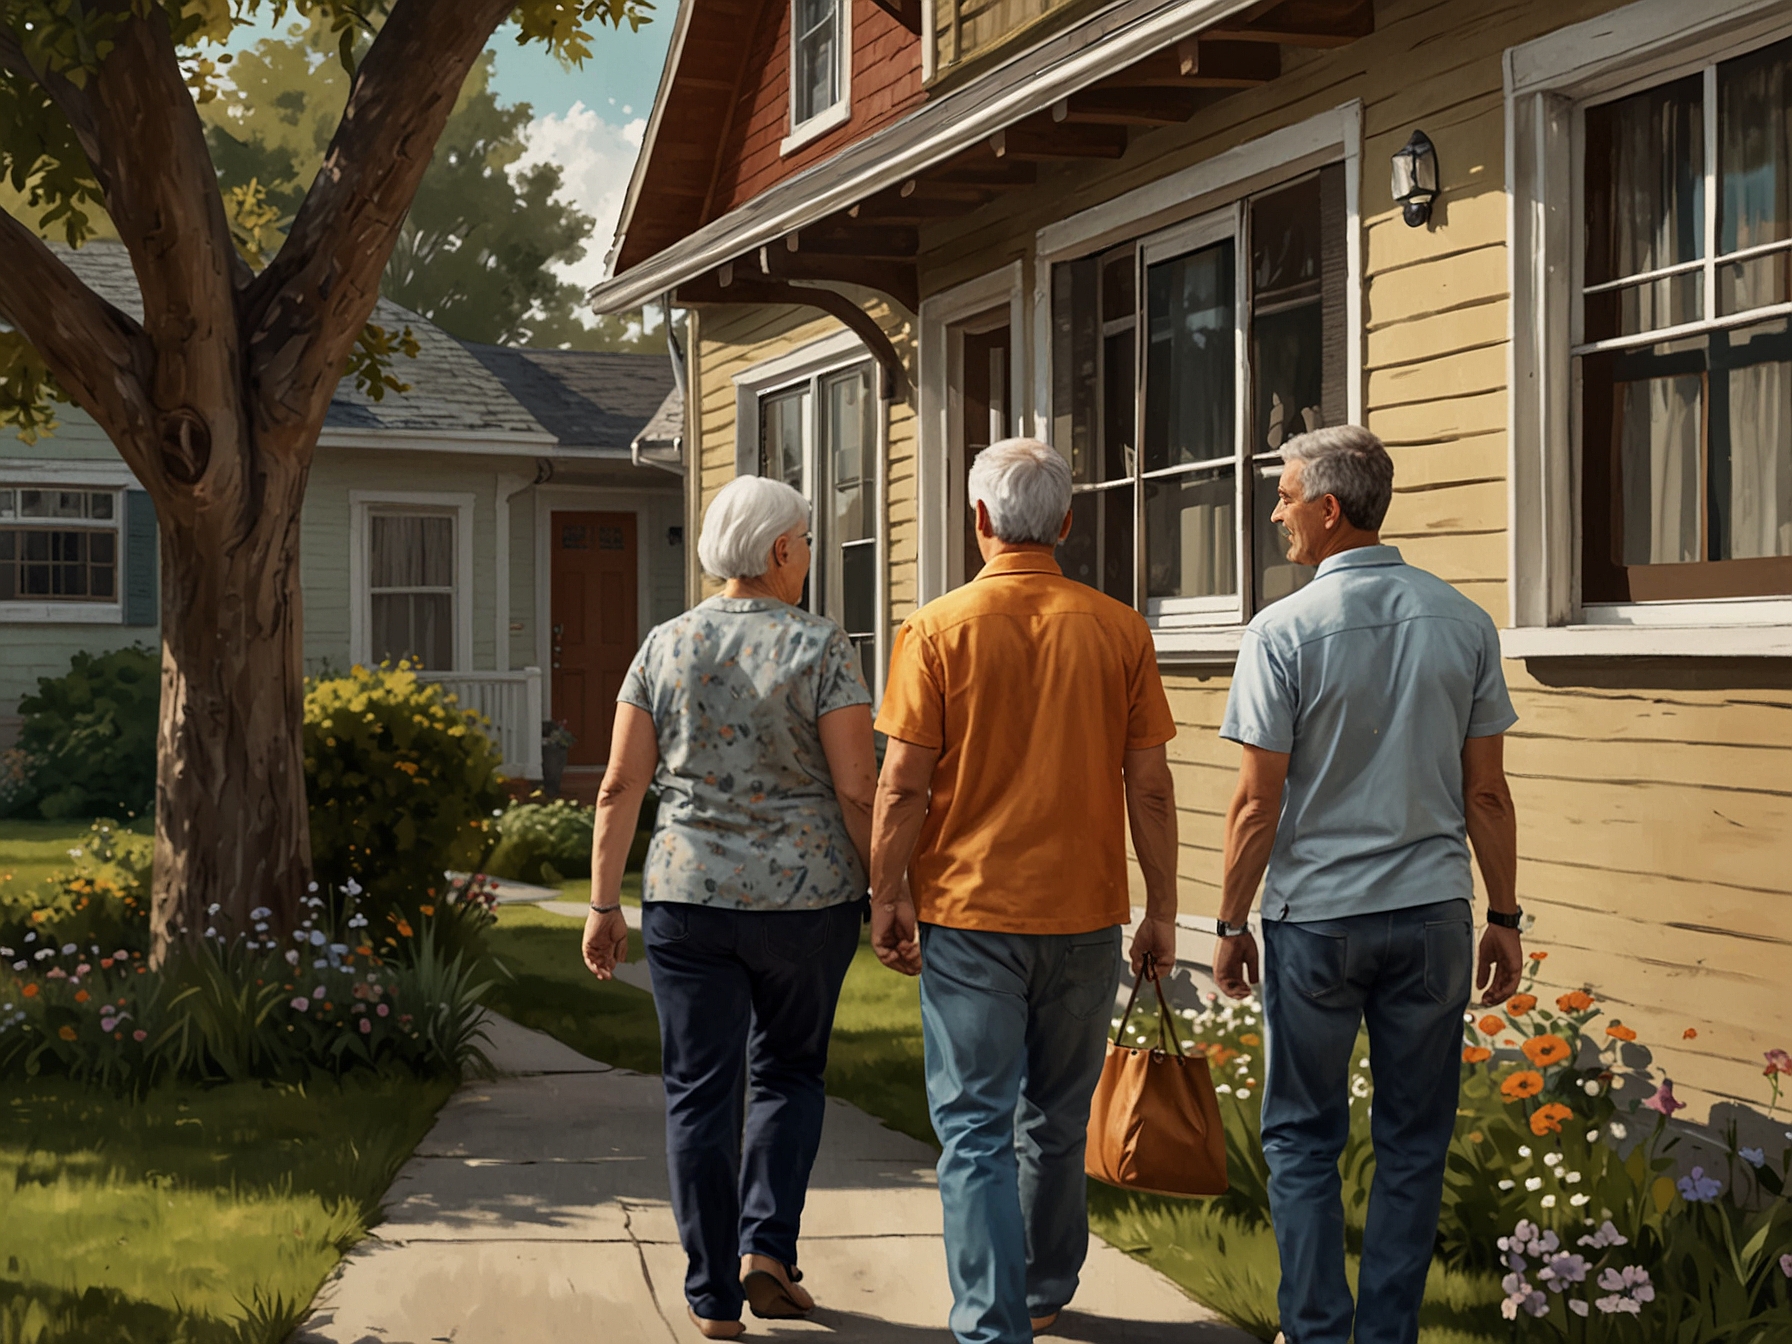 A family engaging with neighbors in a close-knit community setting, illustrating the strong social connections and stability that come with staying in one place over time.